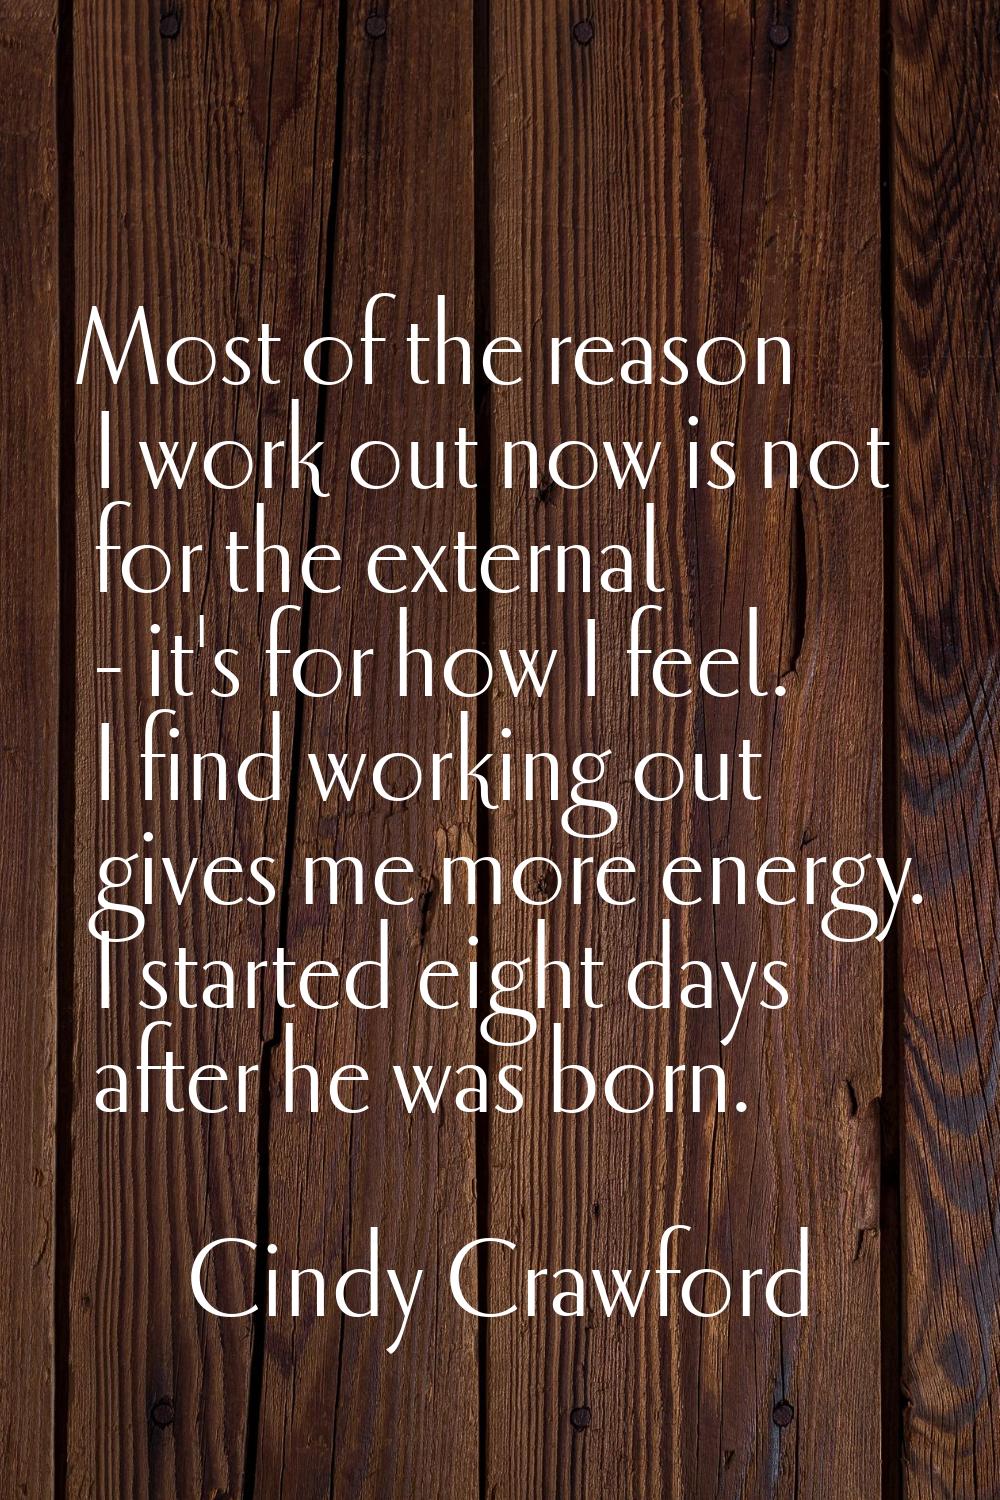 Most of the reason I work out now is not for the external - it's for how I feel. I find working out